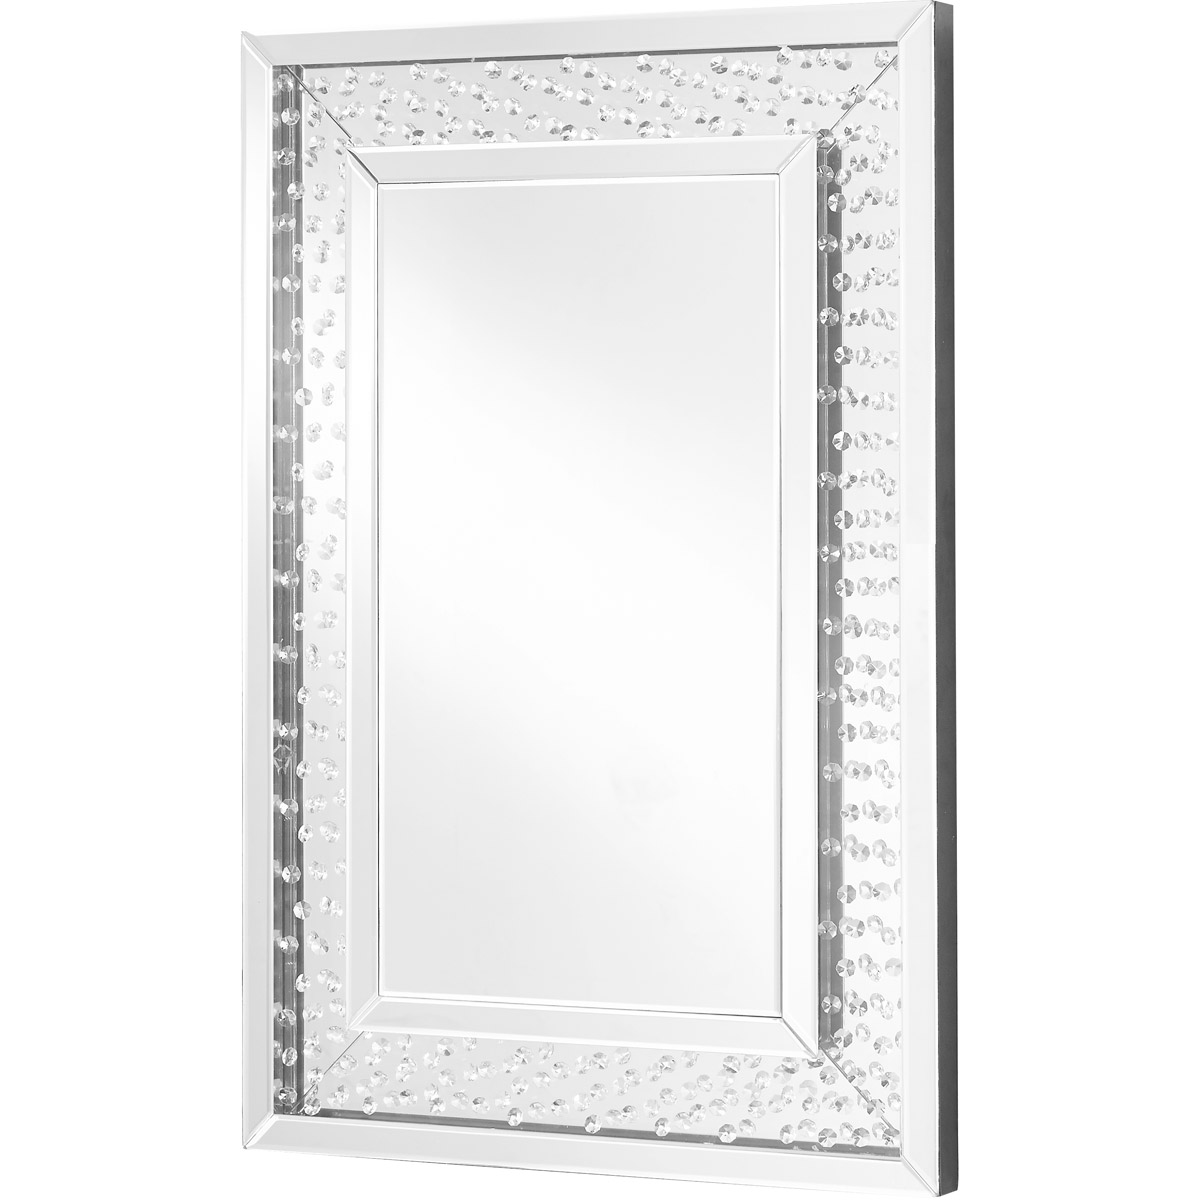 Mr9101 Sparkle 35.5 In. Contemporary Crystal Rectangle Mirror, Clear